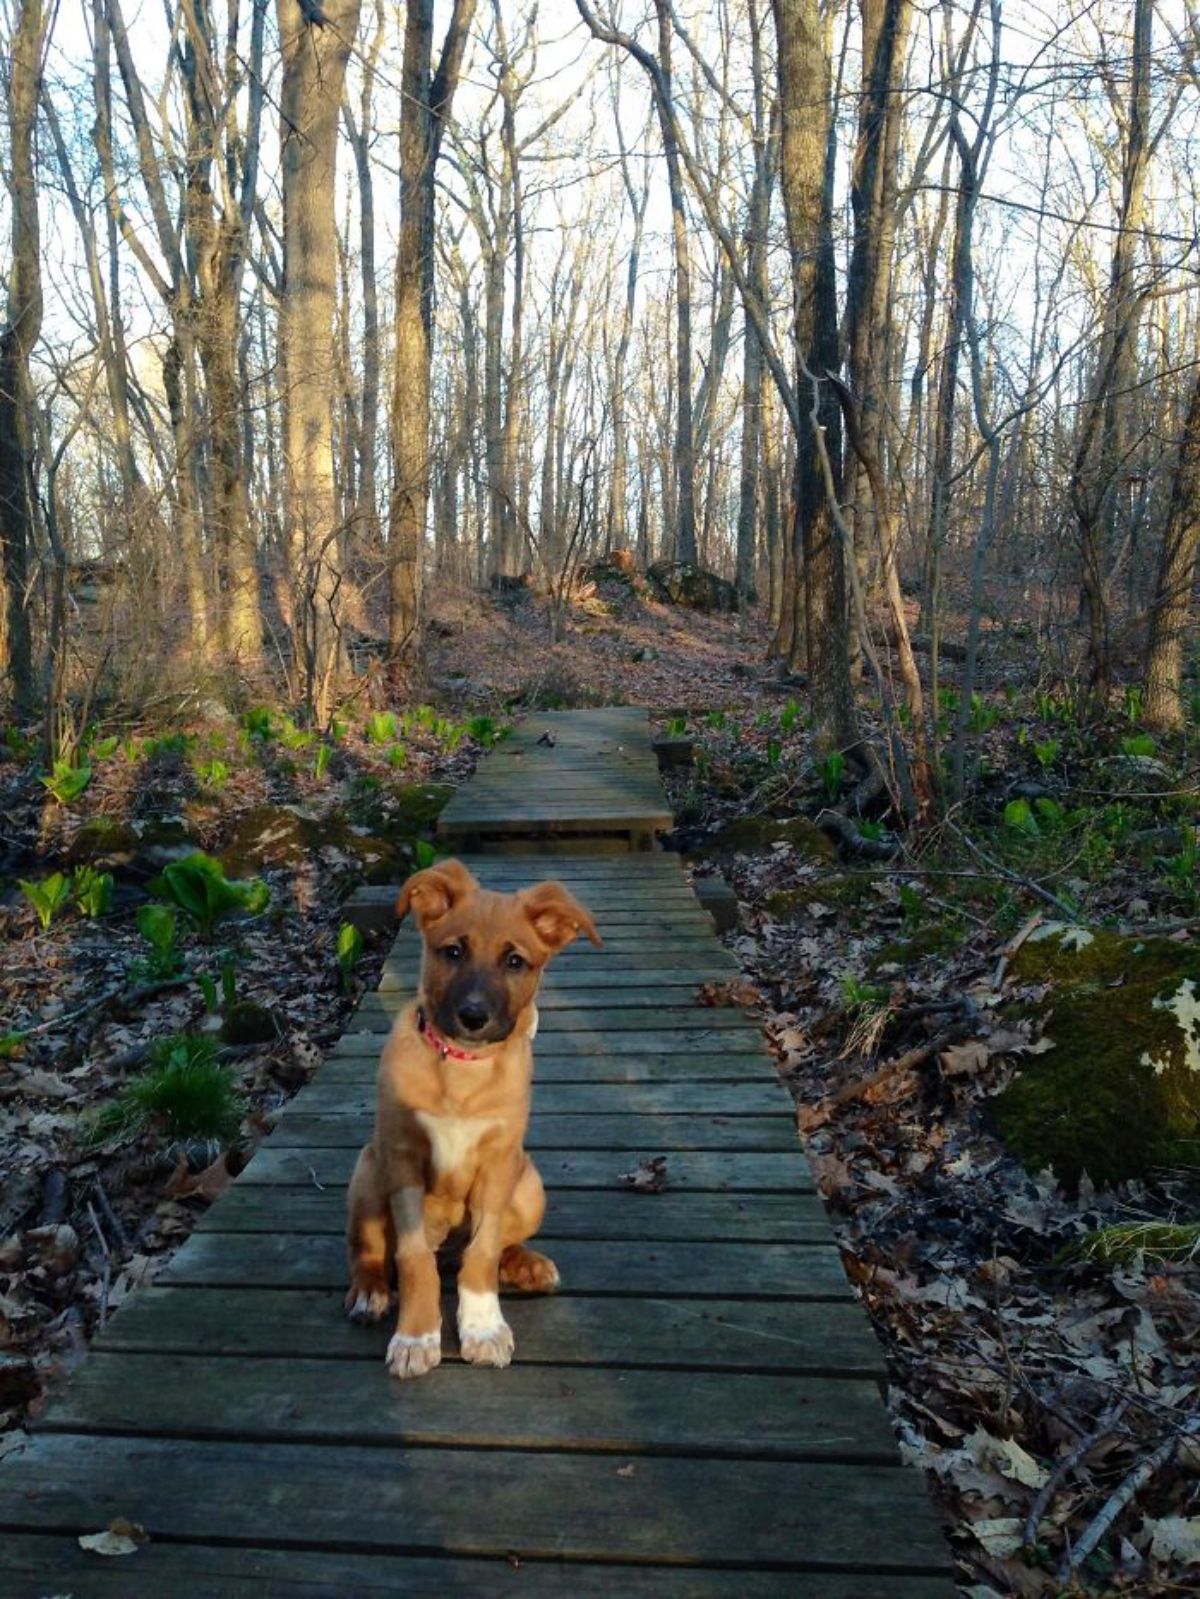 brown and white puppy sititng on a wooden path through a forest